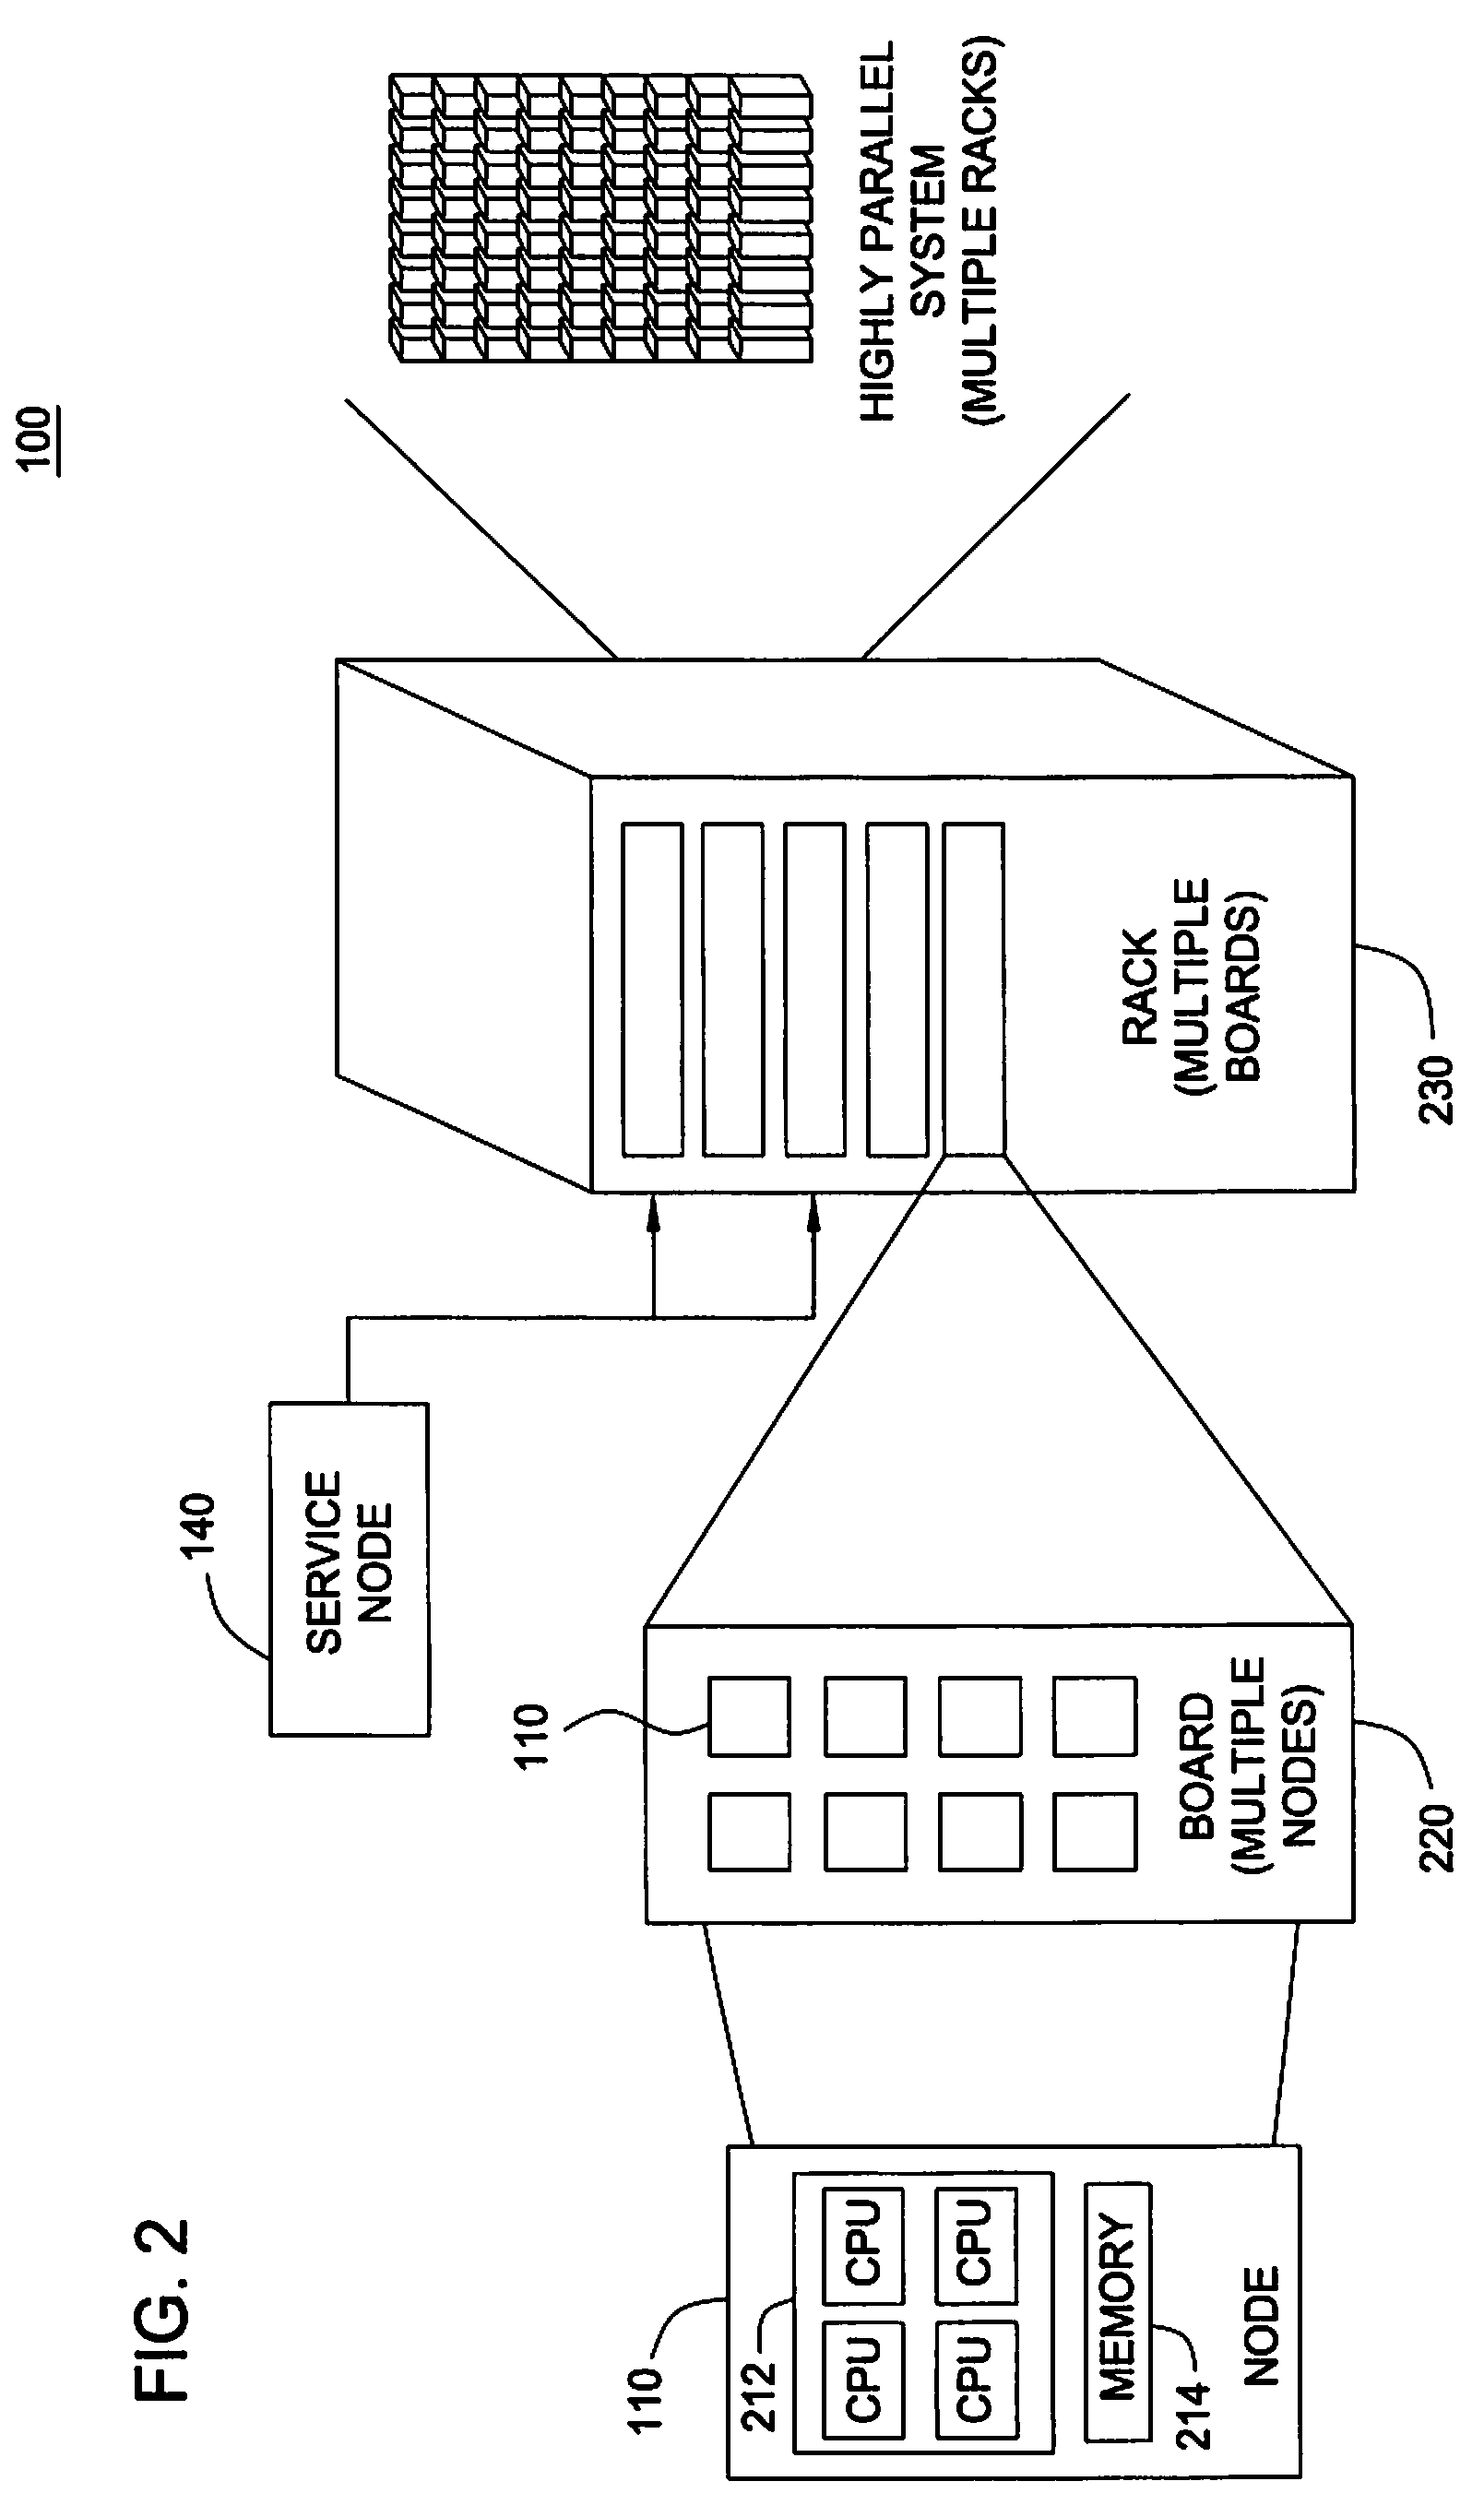 Parallel computing system using coordinator and master nodes for load balancing and distributing work